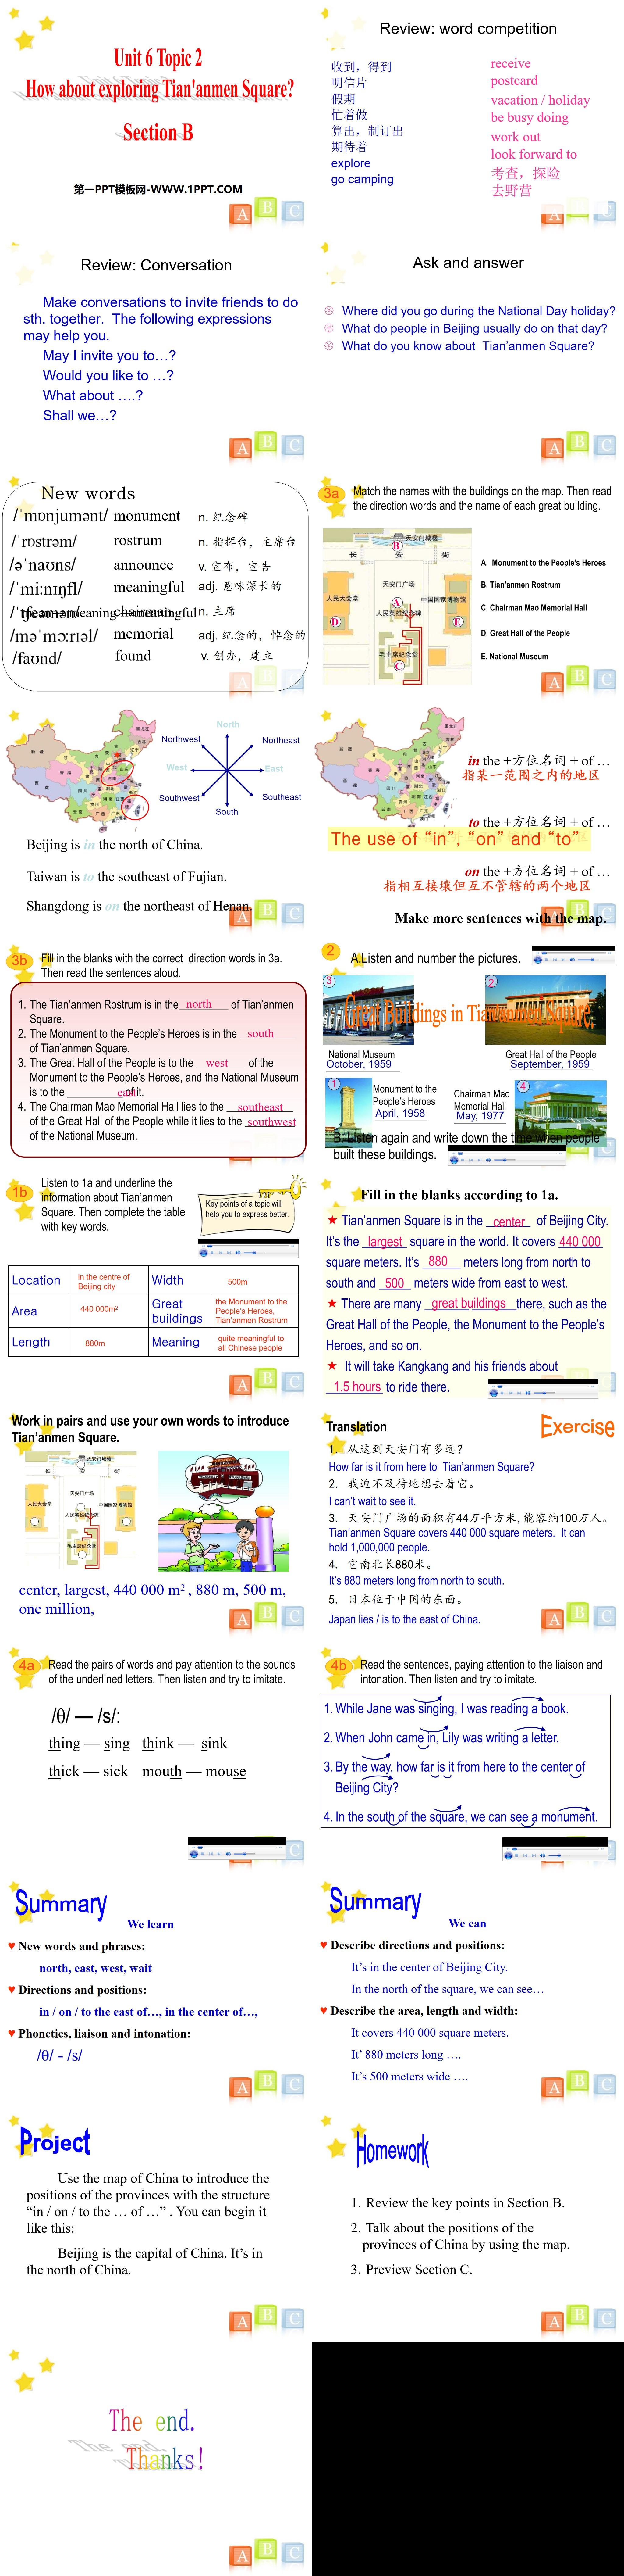 《How about exploring Tian'anmen Square?》SectionB PPT
（2）